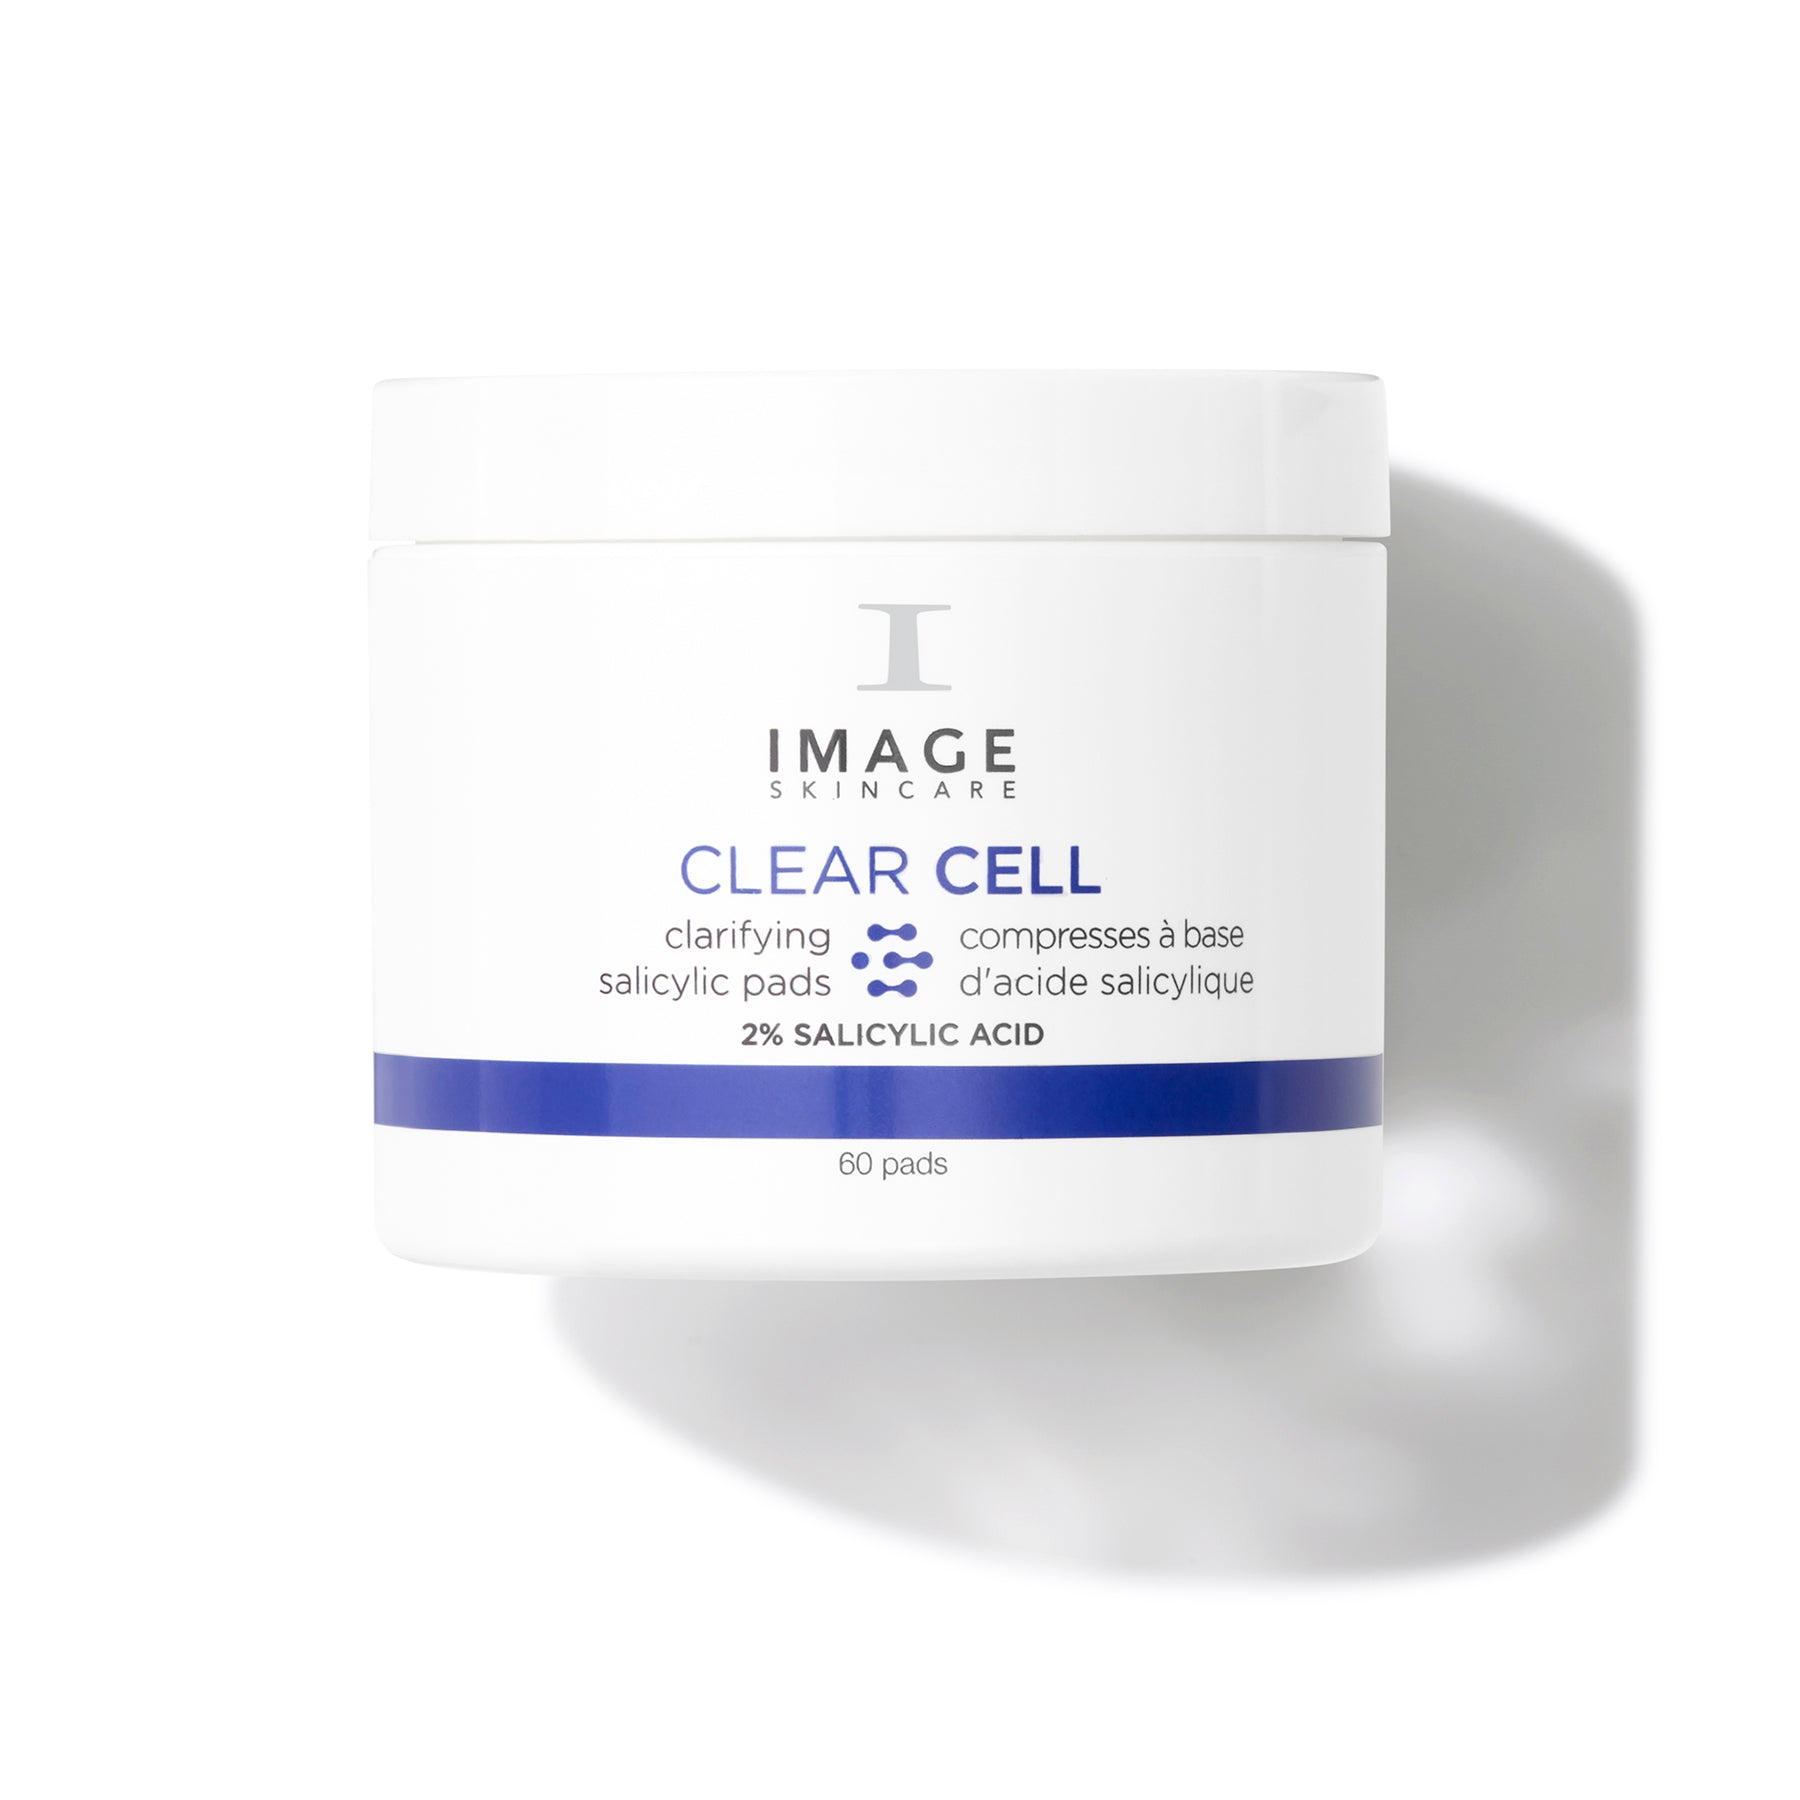 Clear cell. Glycolic acid Pads artfact. Max Clear image Skincare. Neogen PORERASER Clear BHA Pad.